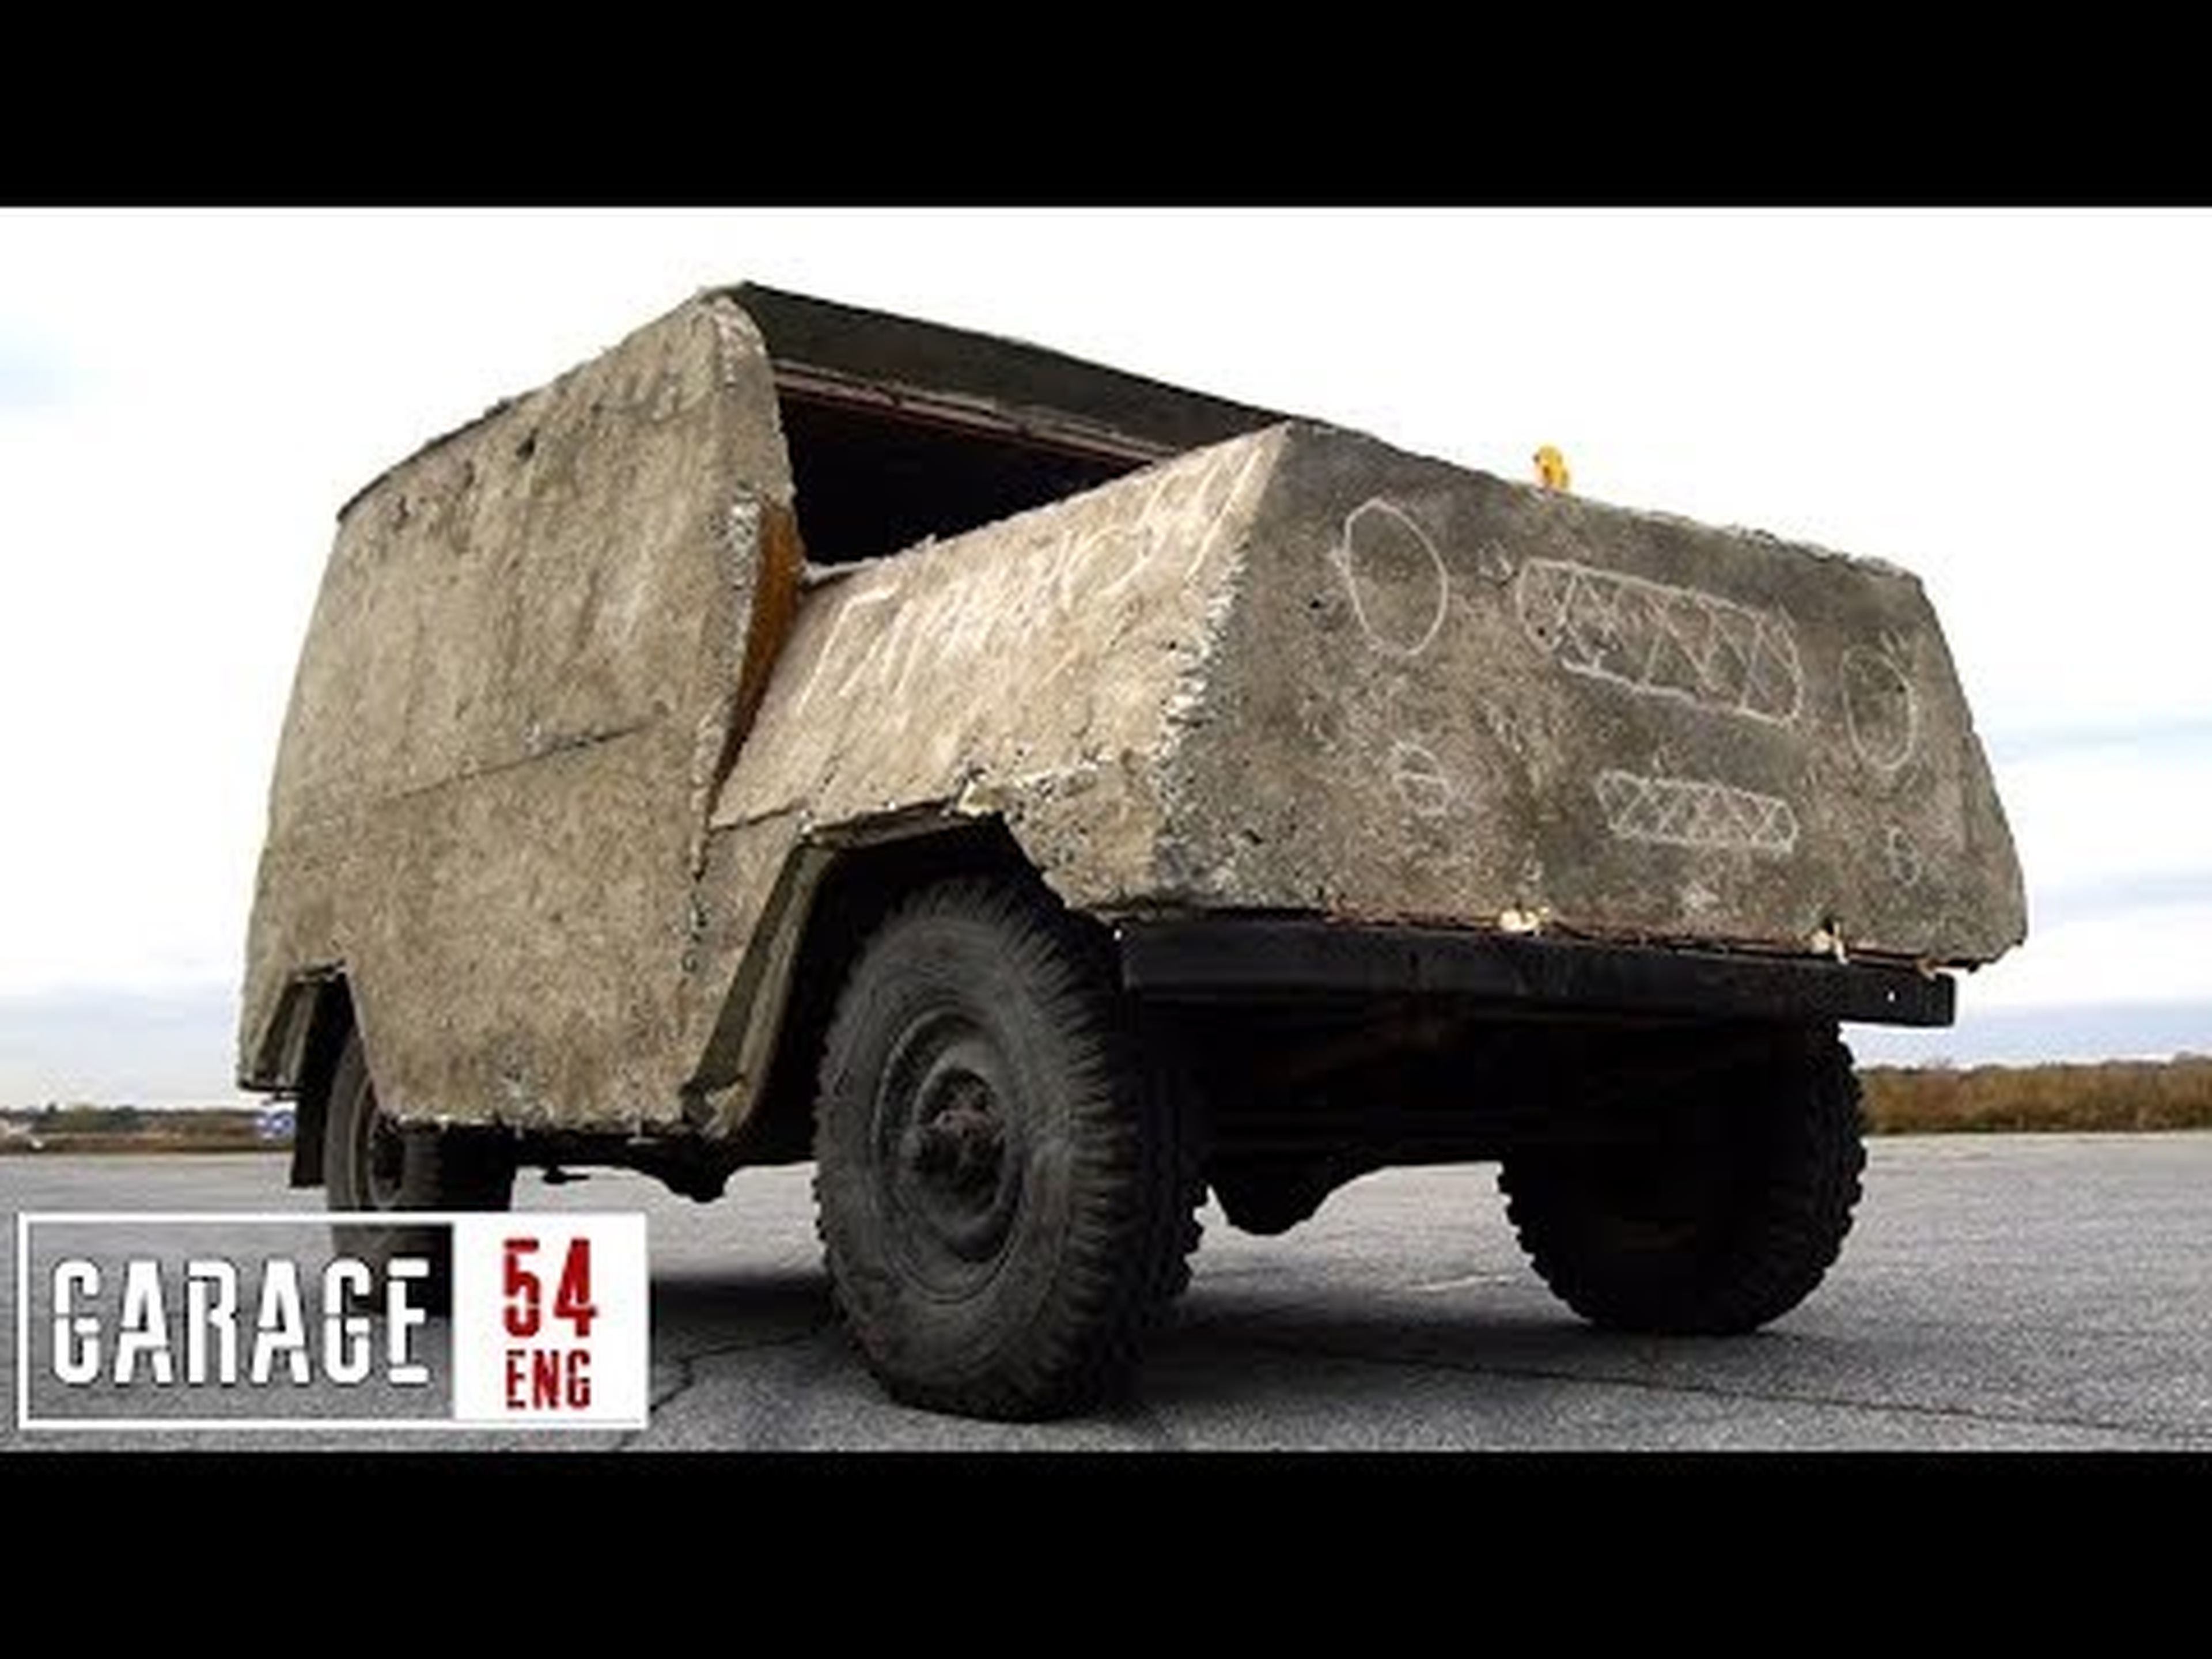 Driving our concrete UAZ for the first time